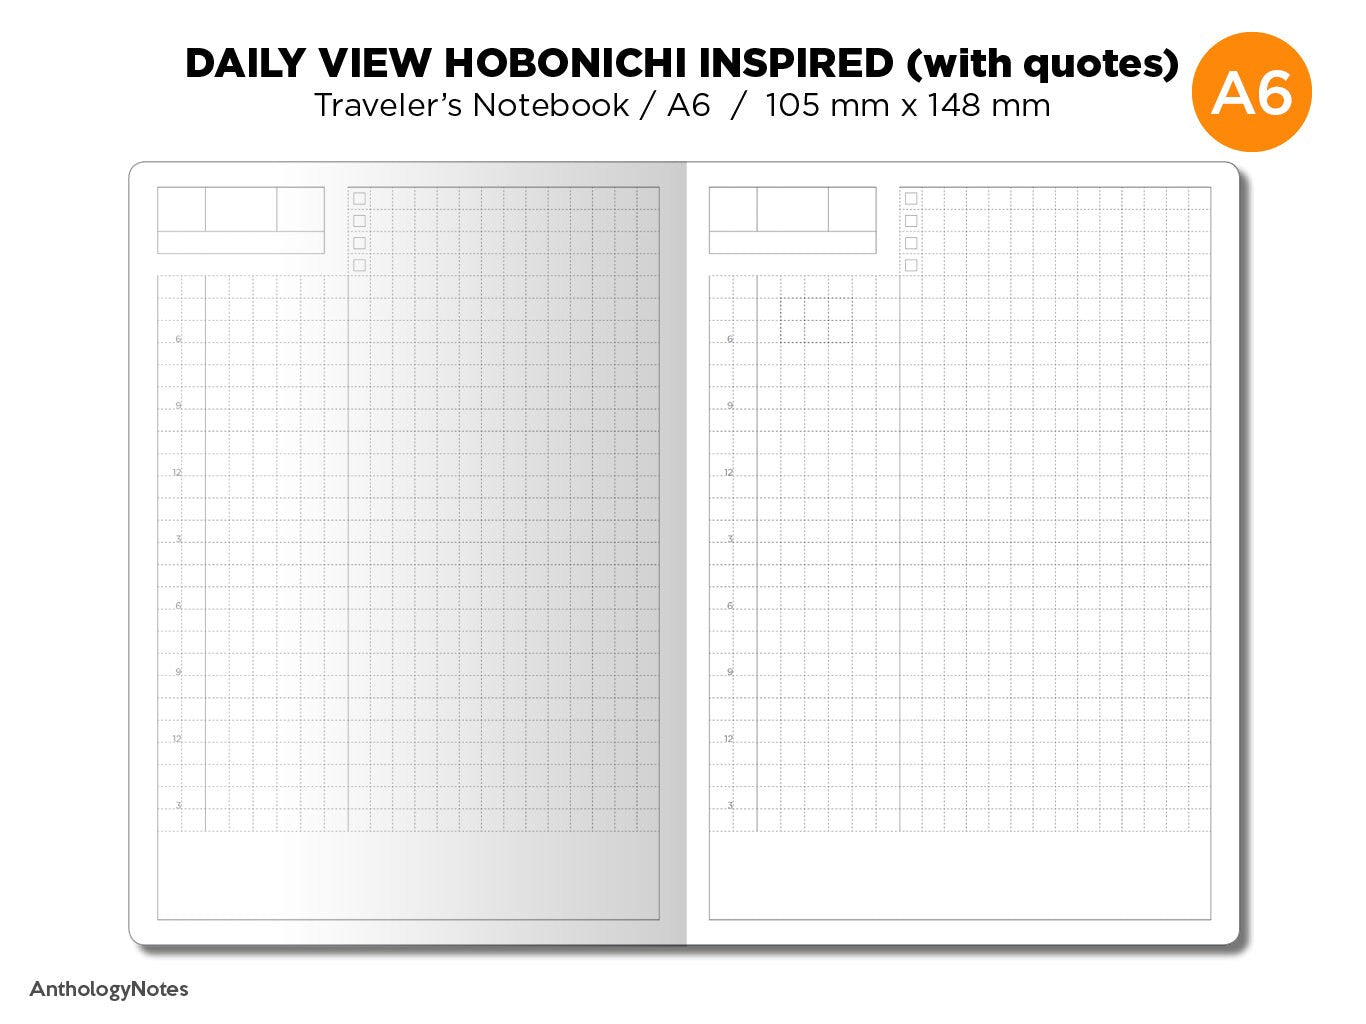 Hobonichi TN Insert - A6 Size - Traveler's Notebook Printable - Do1P - Minimalist - Daily View - With Quotes Section